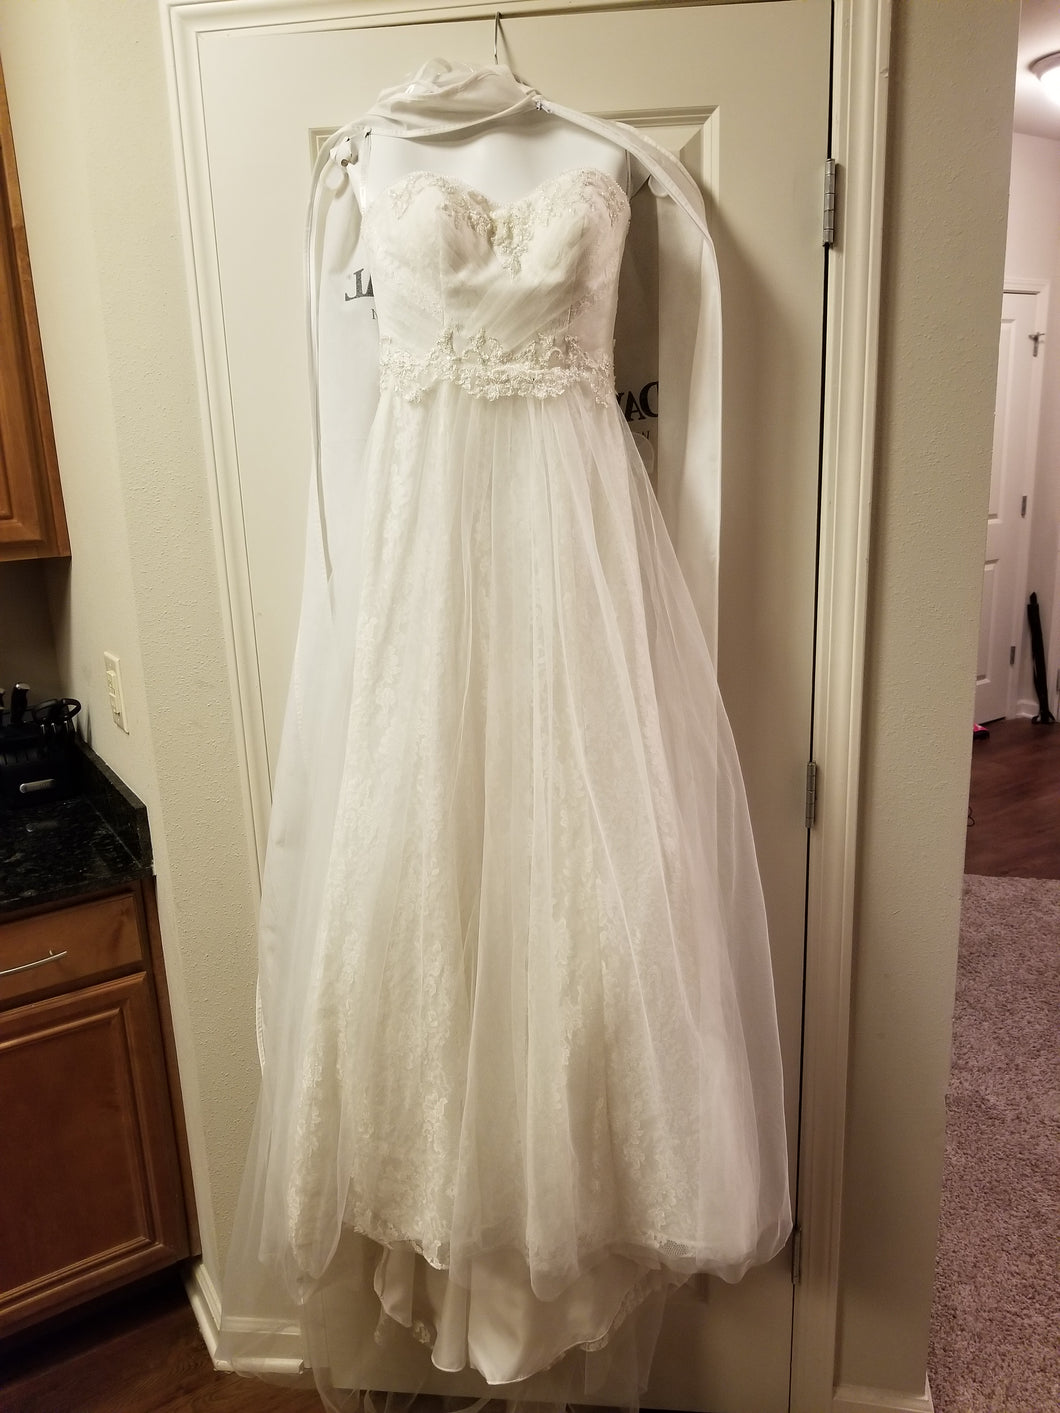 David's Bridal 'Strapless Tulle' size 2 new wedding dress front view on hanger